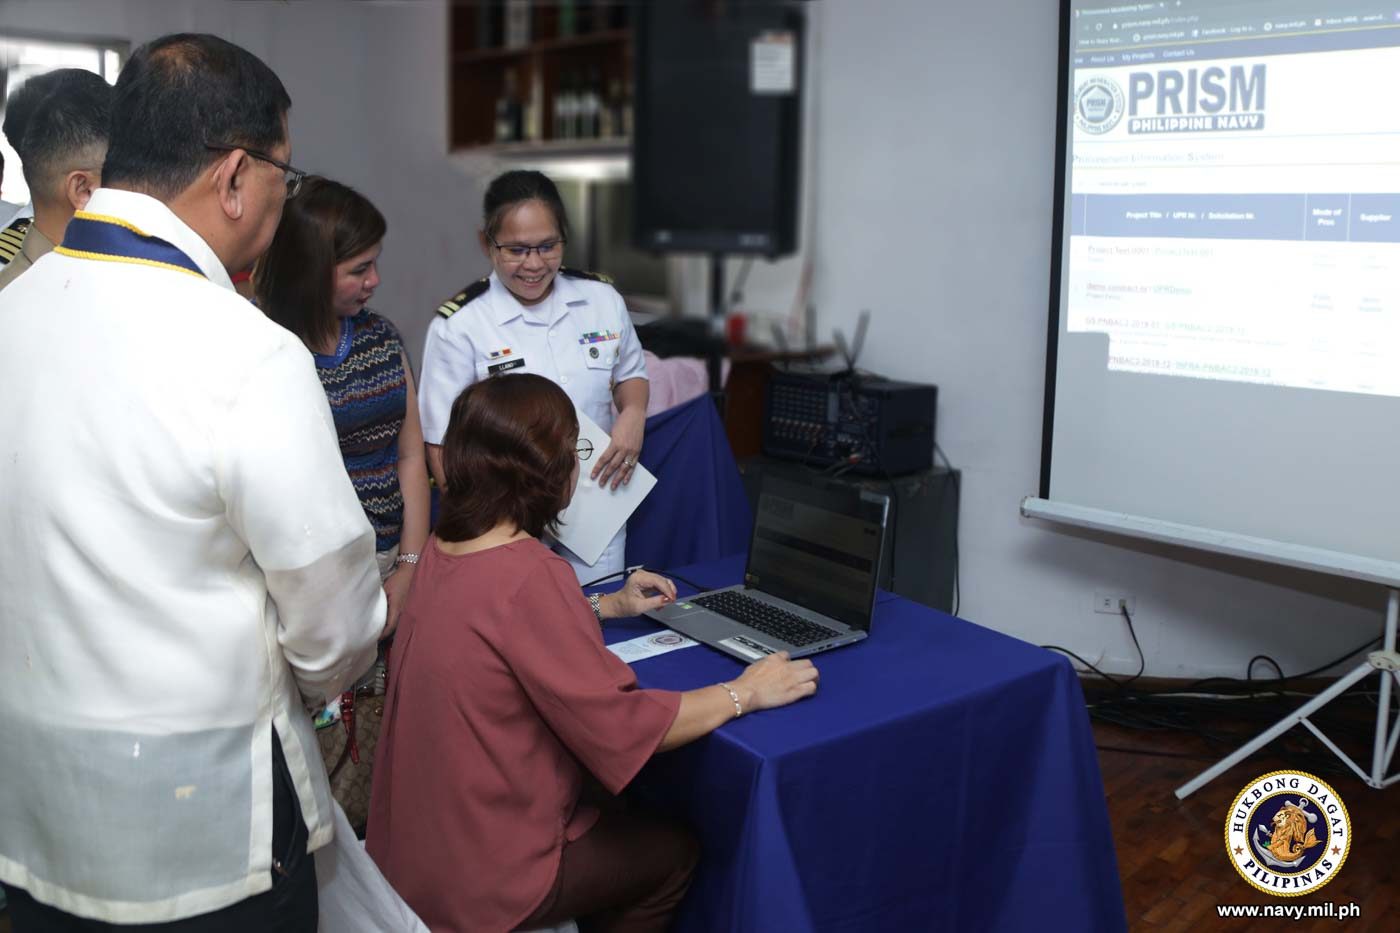 PH Navy launches web app to monitor procurements